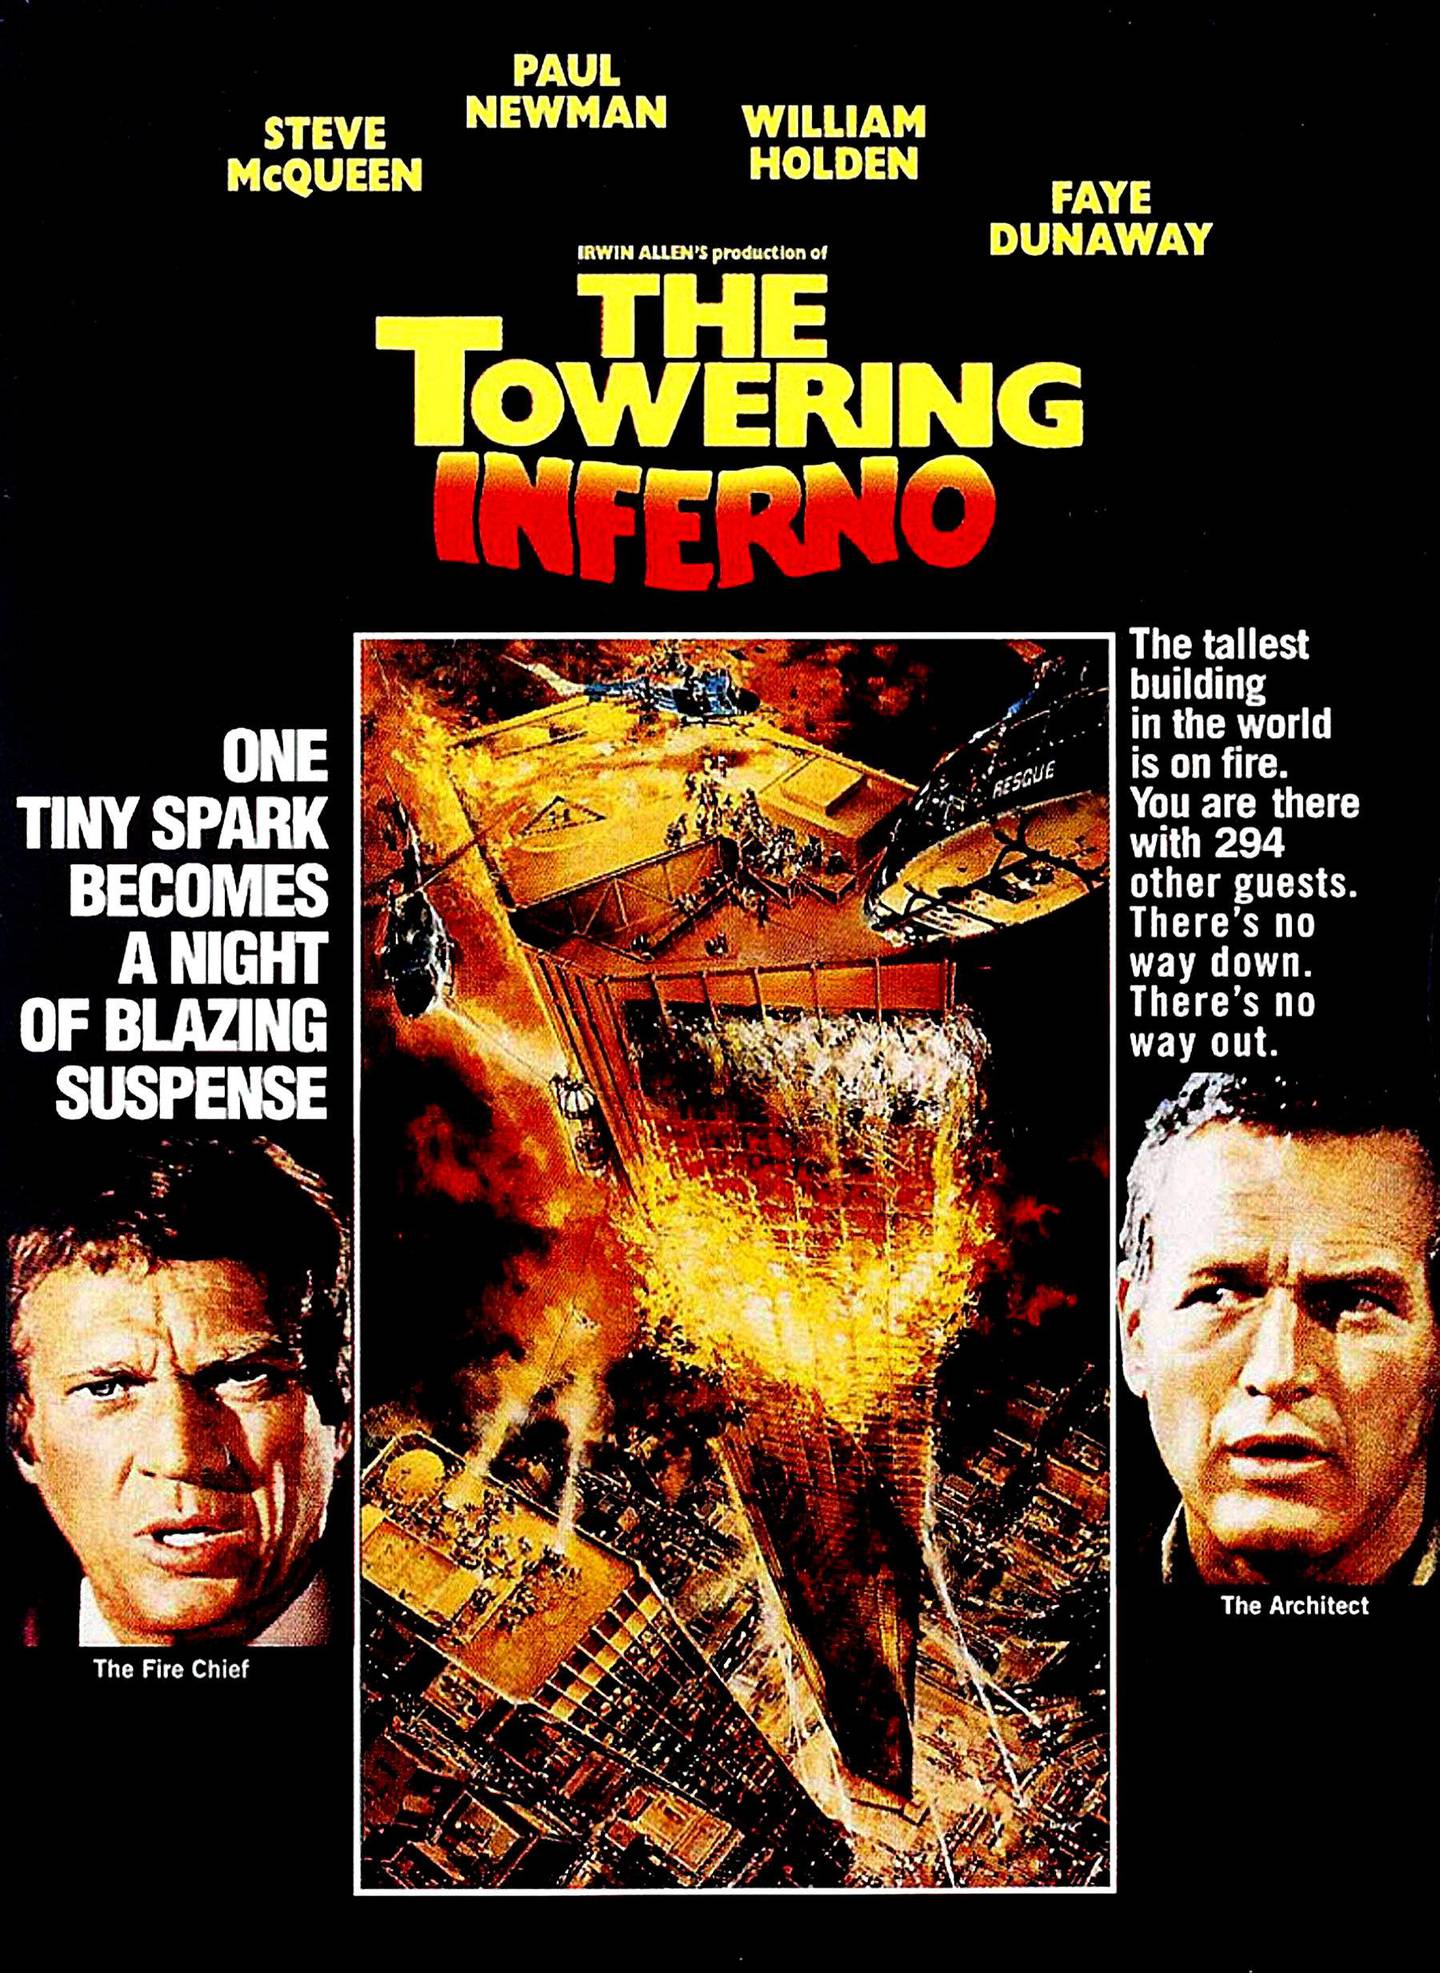 No Merchandising. Editorial Use Only. No Book Cover Usage.
Mandatory Credit: Photo by 20th Century Fox/Warners/Kobal/REX/Shutterstock (5885552ap)
Steve McQueen, Paul Newman
The Towering Inferno - 1974
Director: John Guillermin
20th Century Fox/Warners
USA
Lobby Card/Poster
Action/Adventure
La Tour infernale